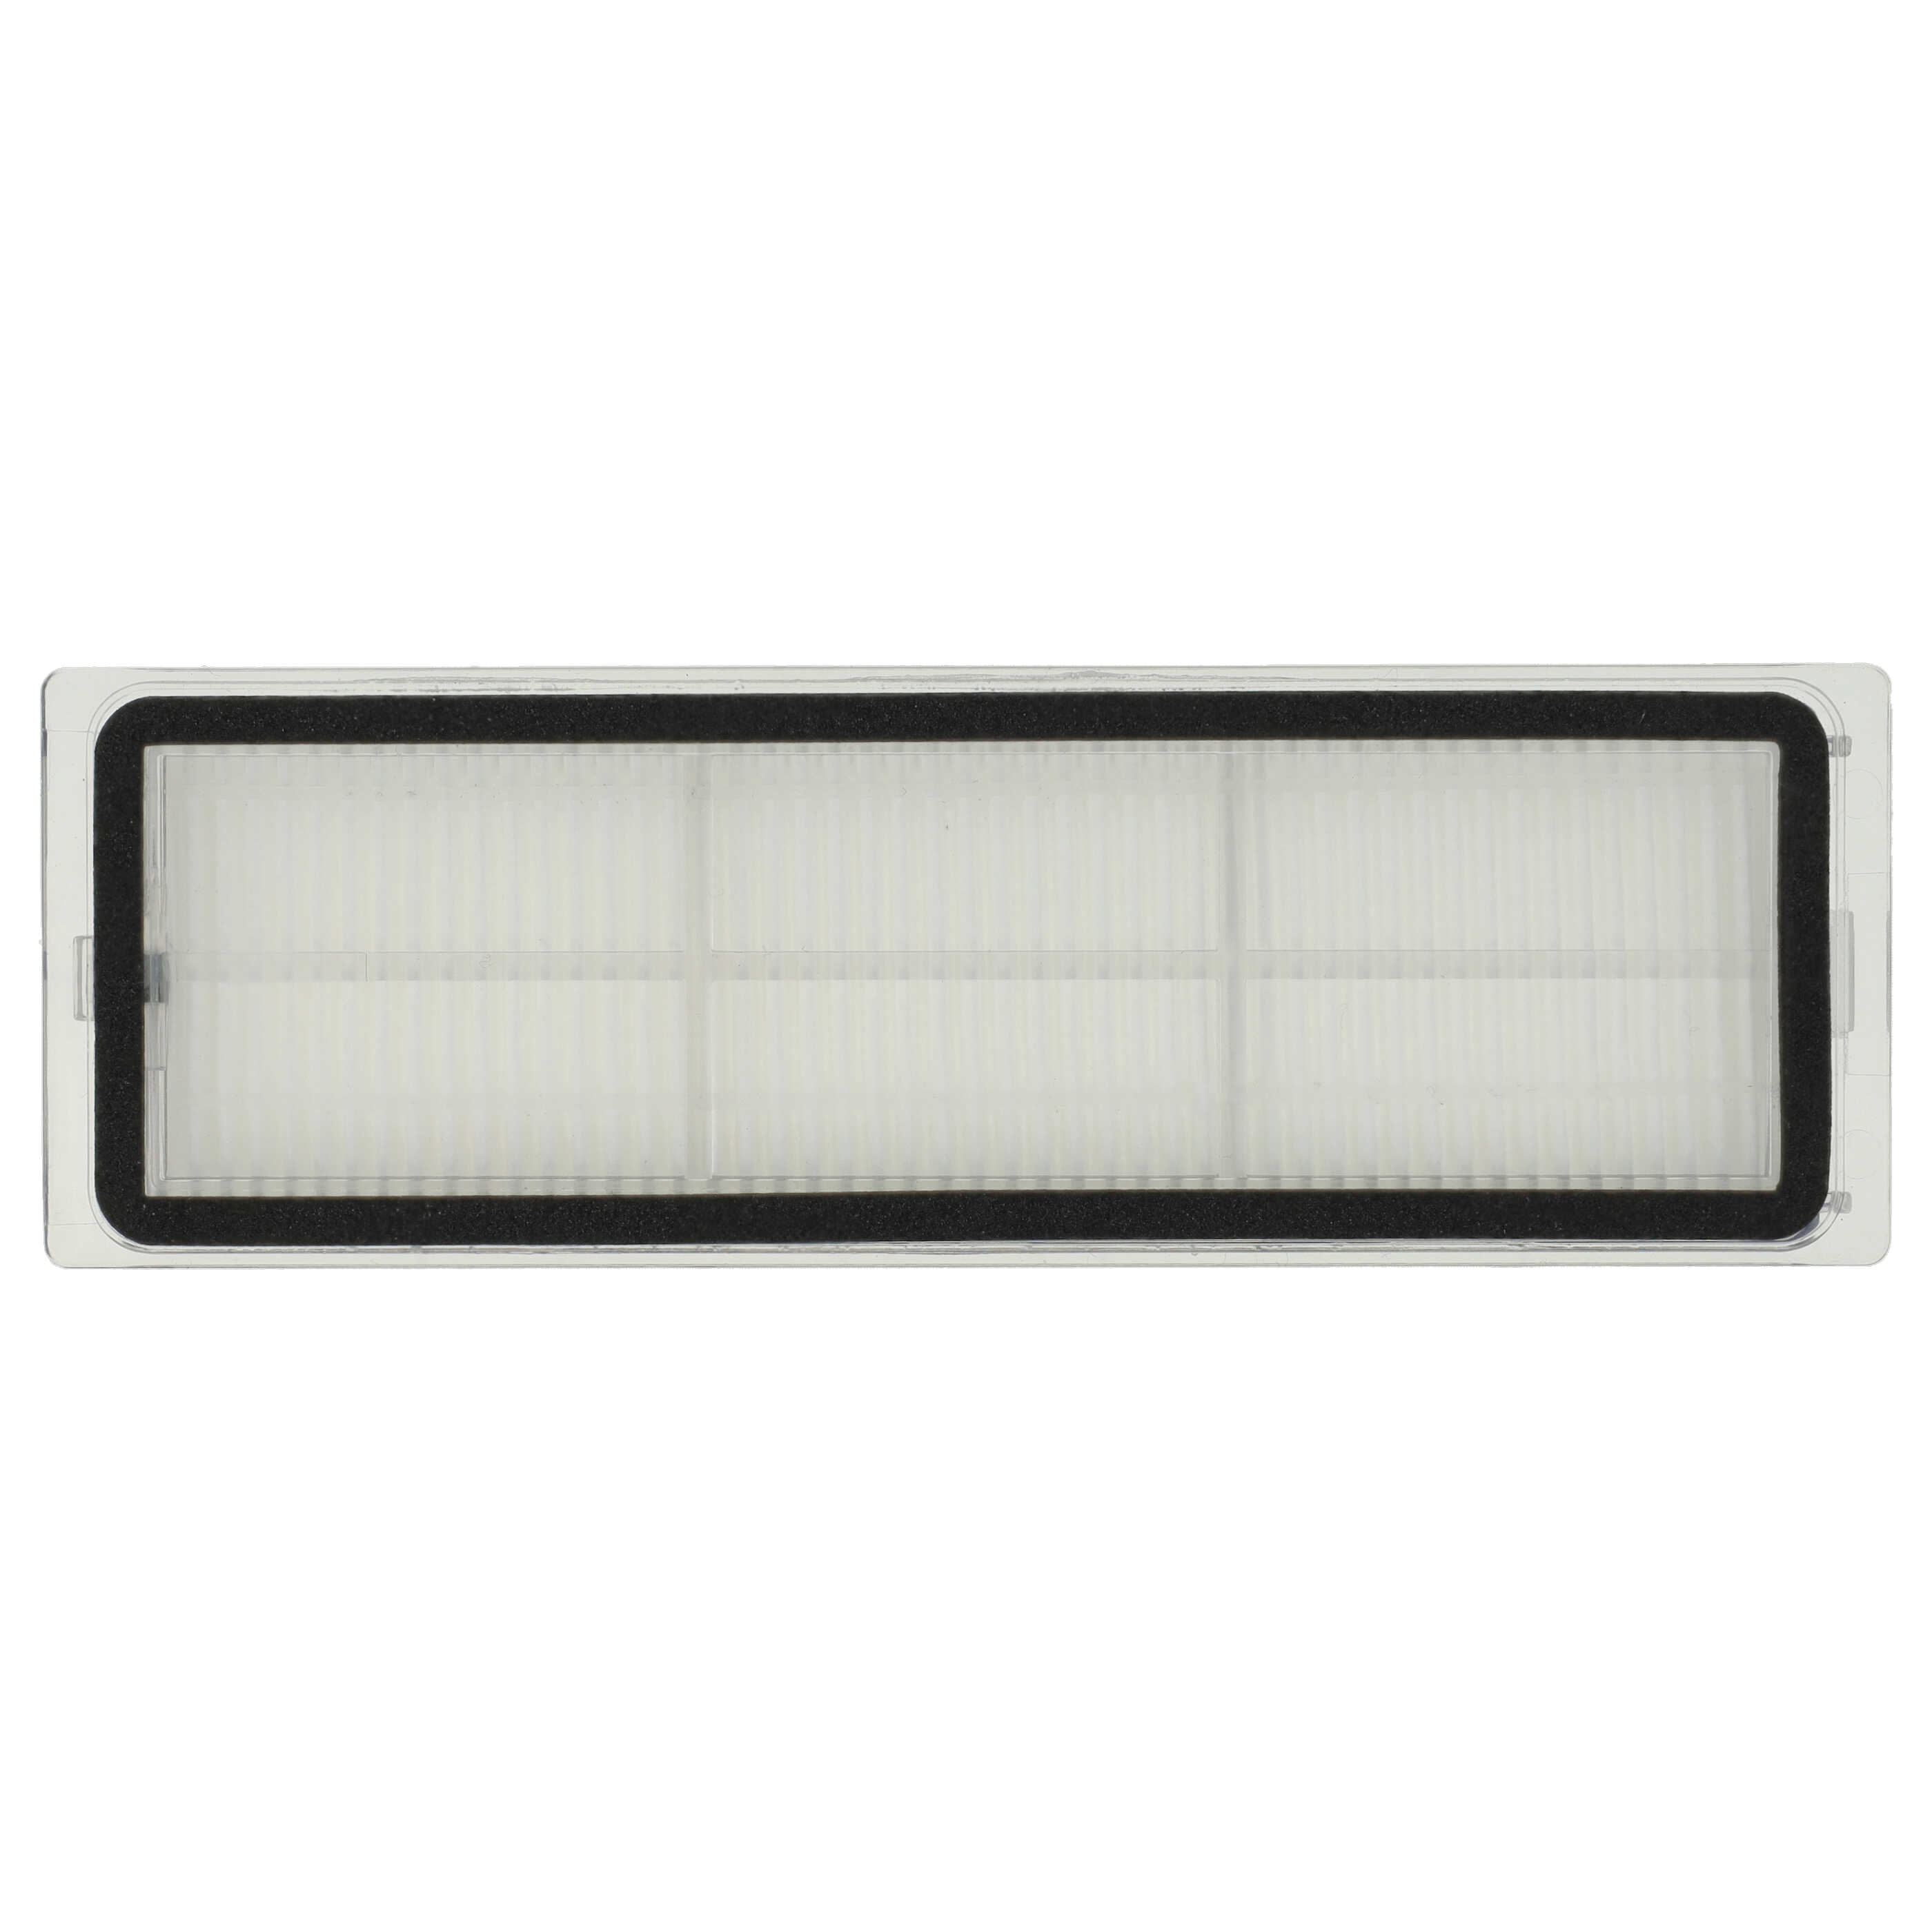 2x HEPA Filter + Frame suitable for D9 Dreame, Xiaomi D9 Robot Cleaner - 15 x 5 x 1.4 cm